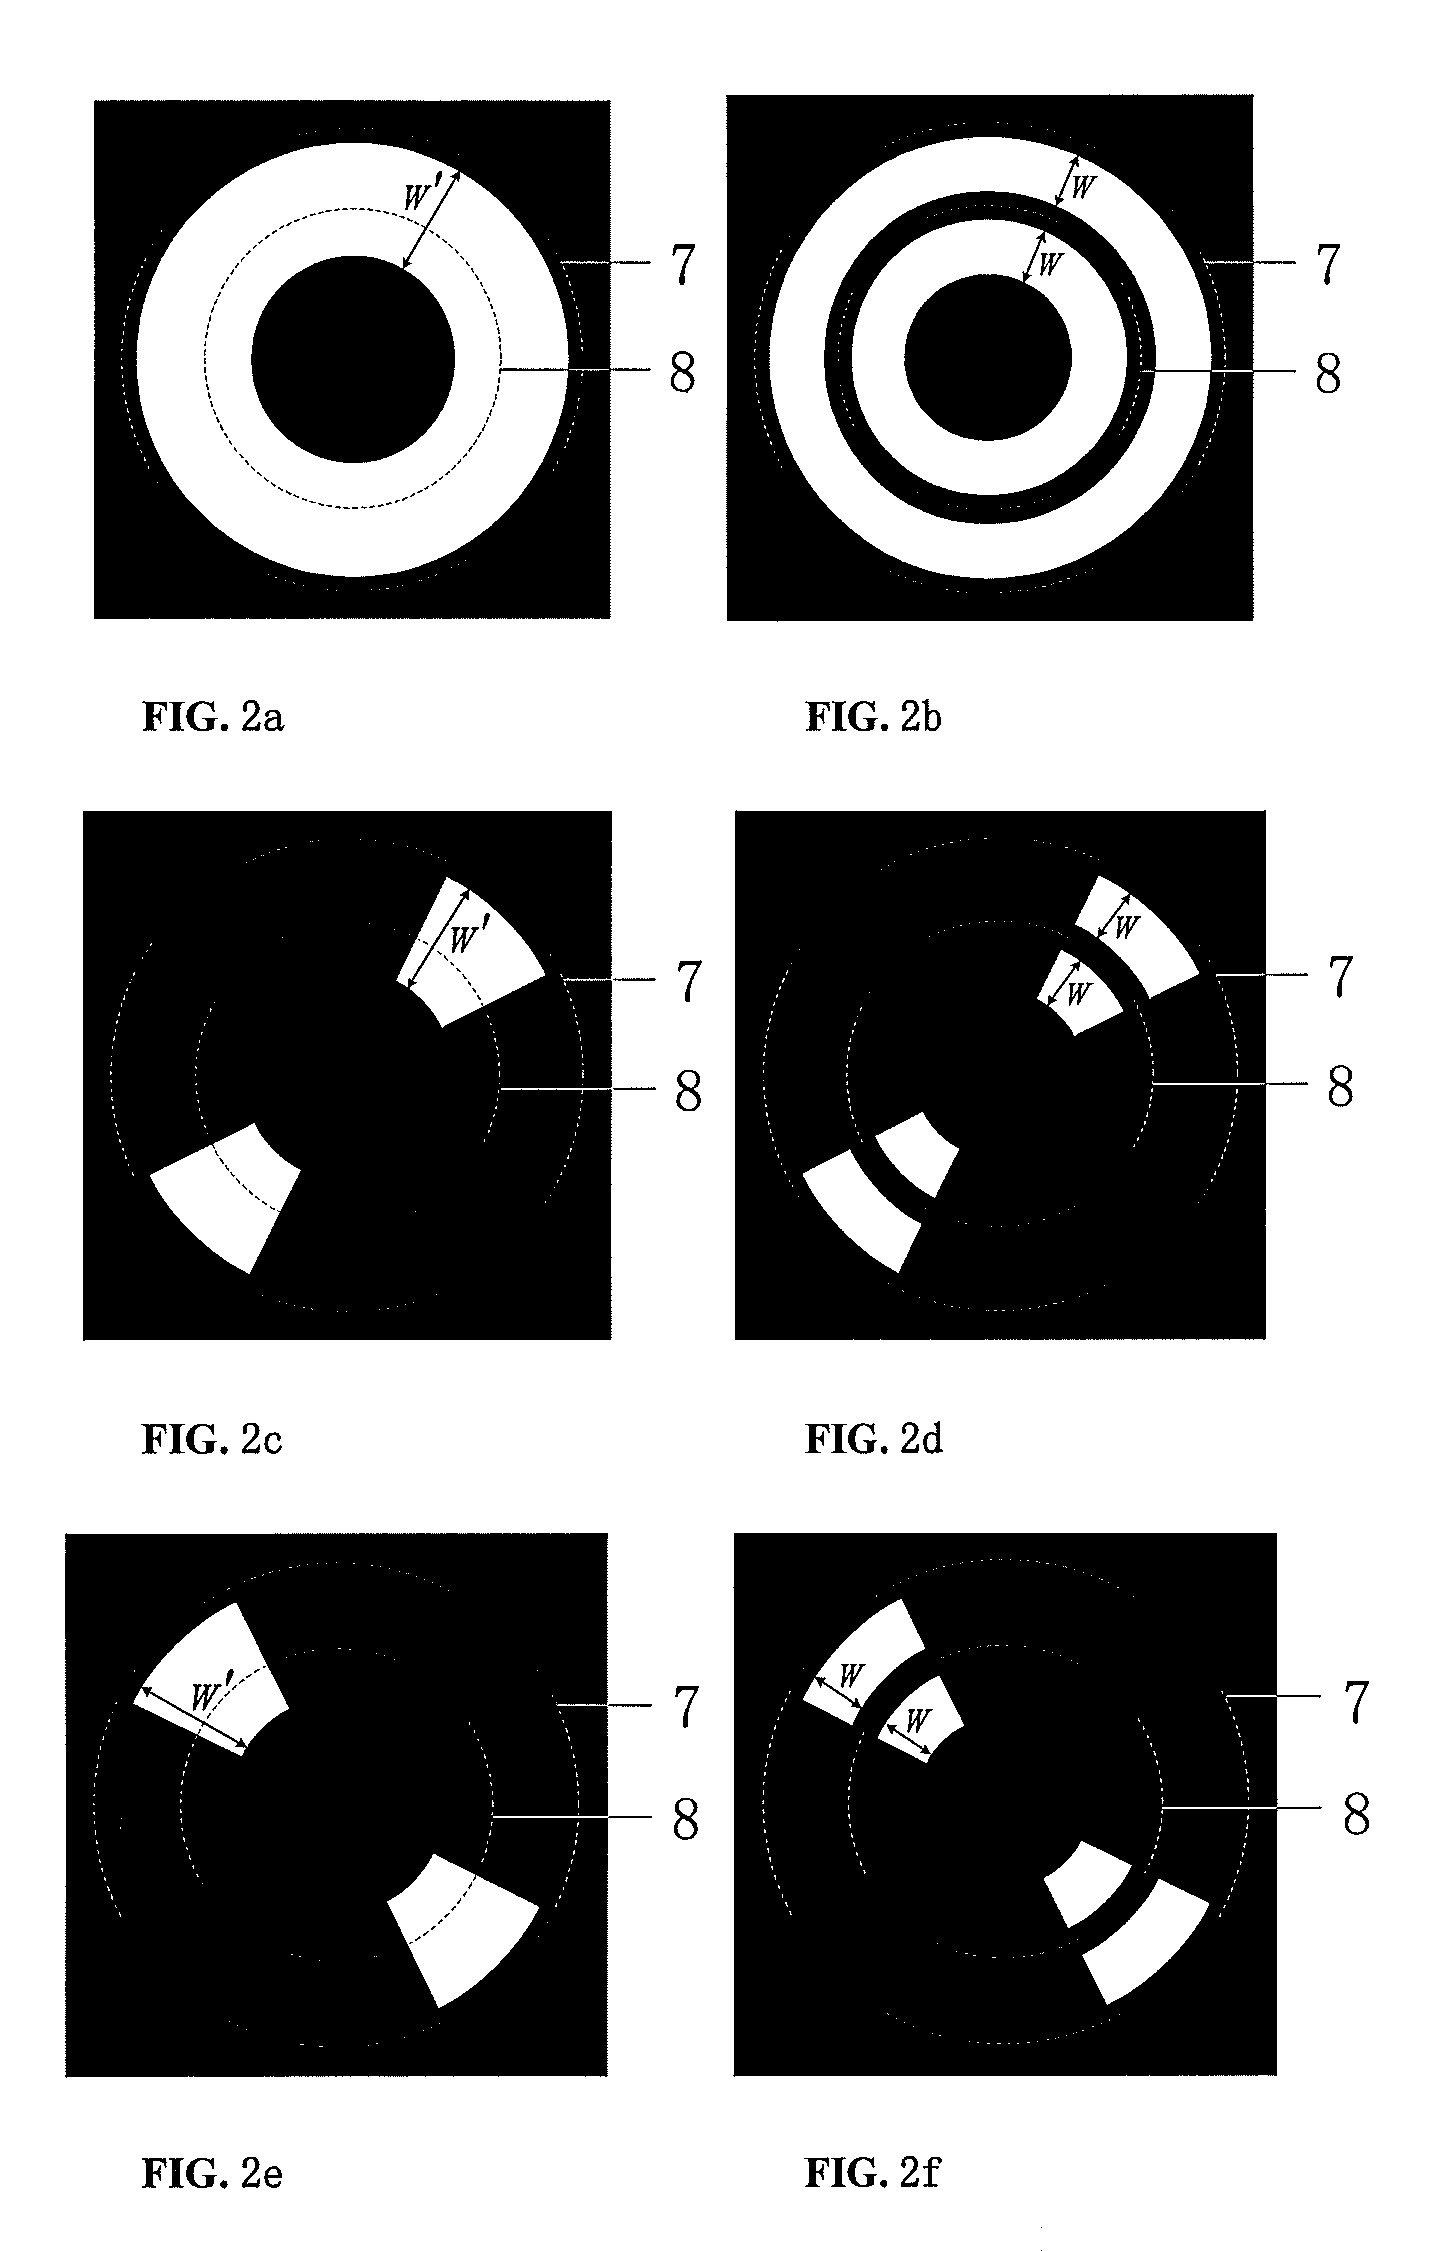 Lithography pupil shaping optical system and method for generating off-axis illumination mode